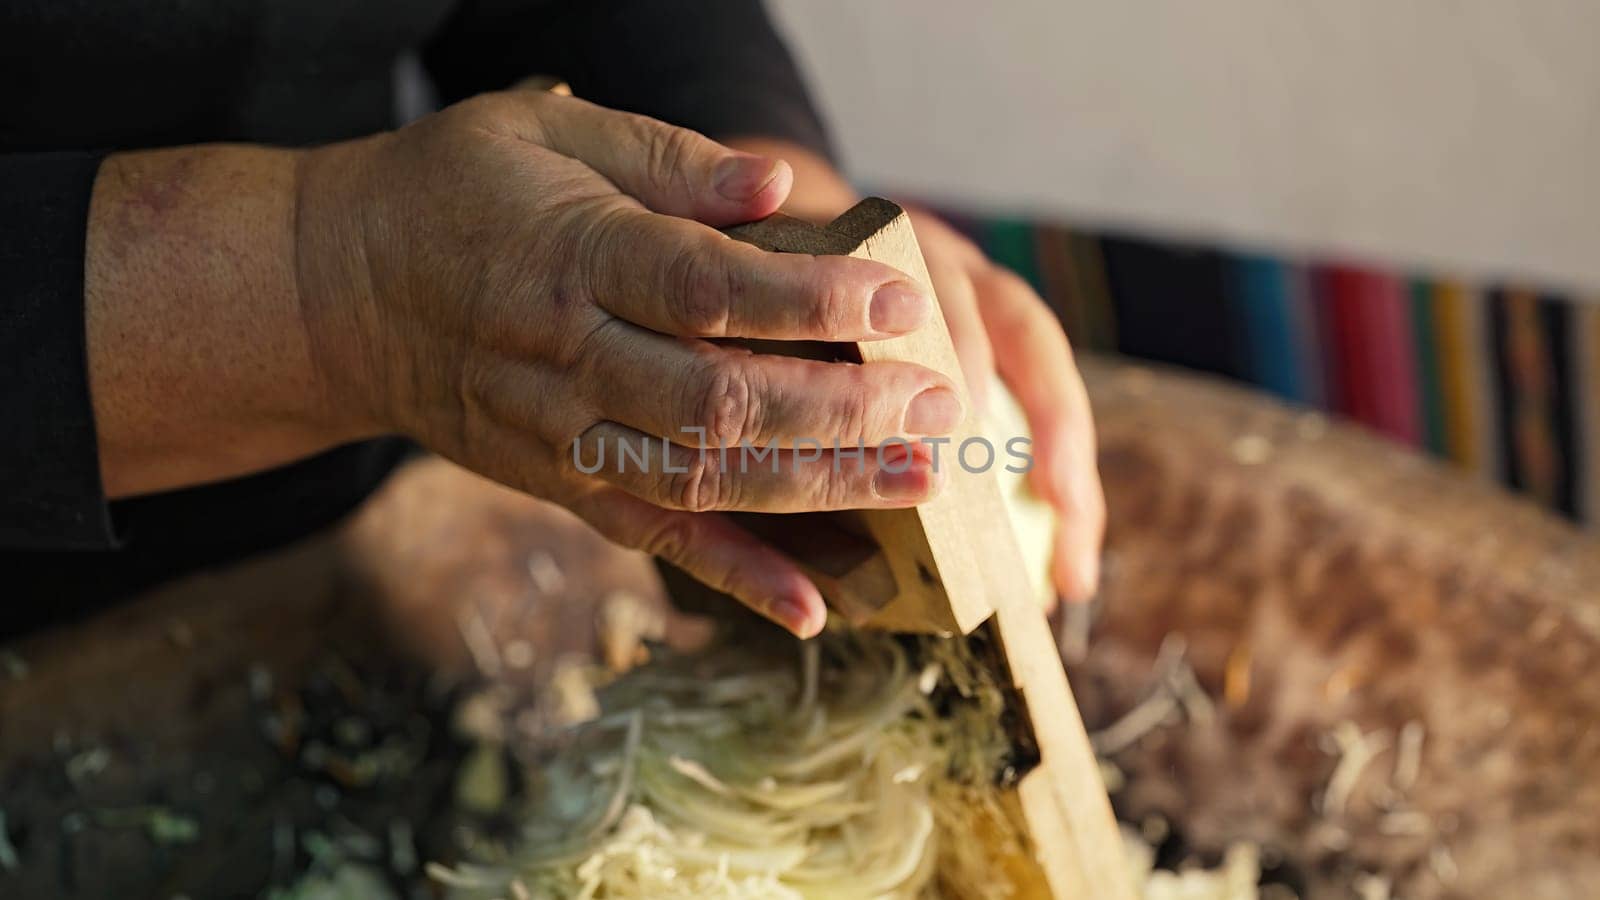 Woman rubs cabbage on grater, cooking traditional ukrainian fermented - sauerkraut salad from shredded carrot. Mixes chopped vegetables in family's ancient wooden trough. High quality